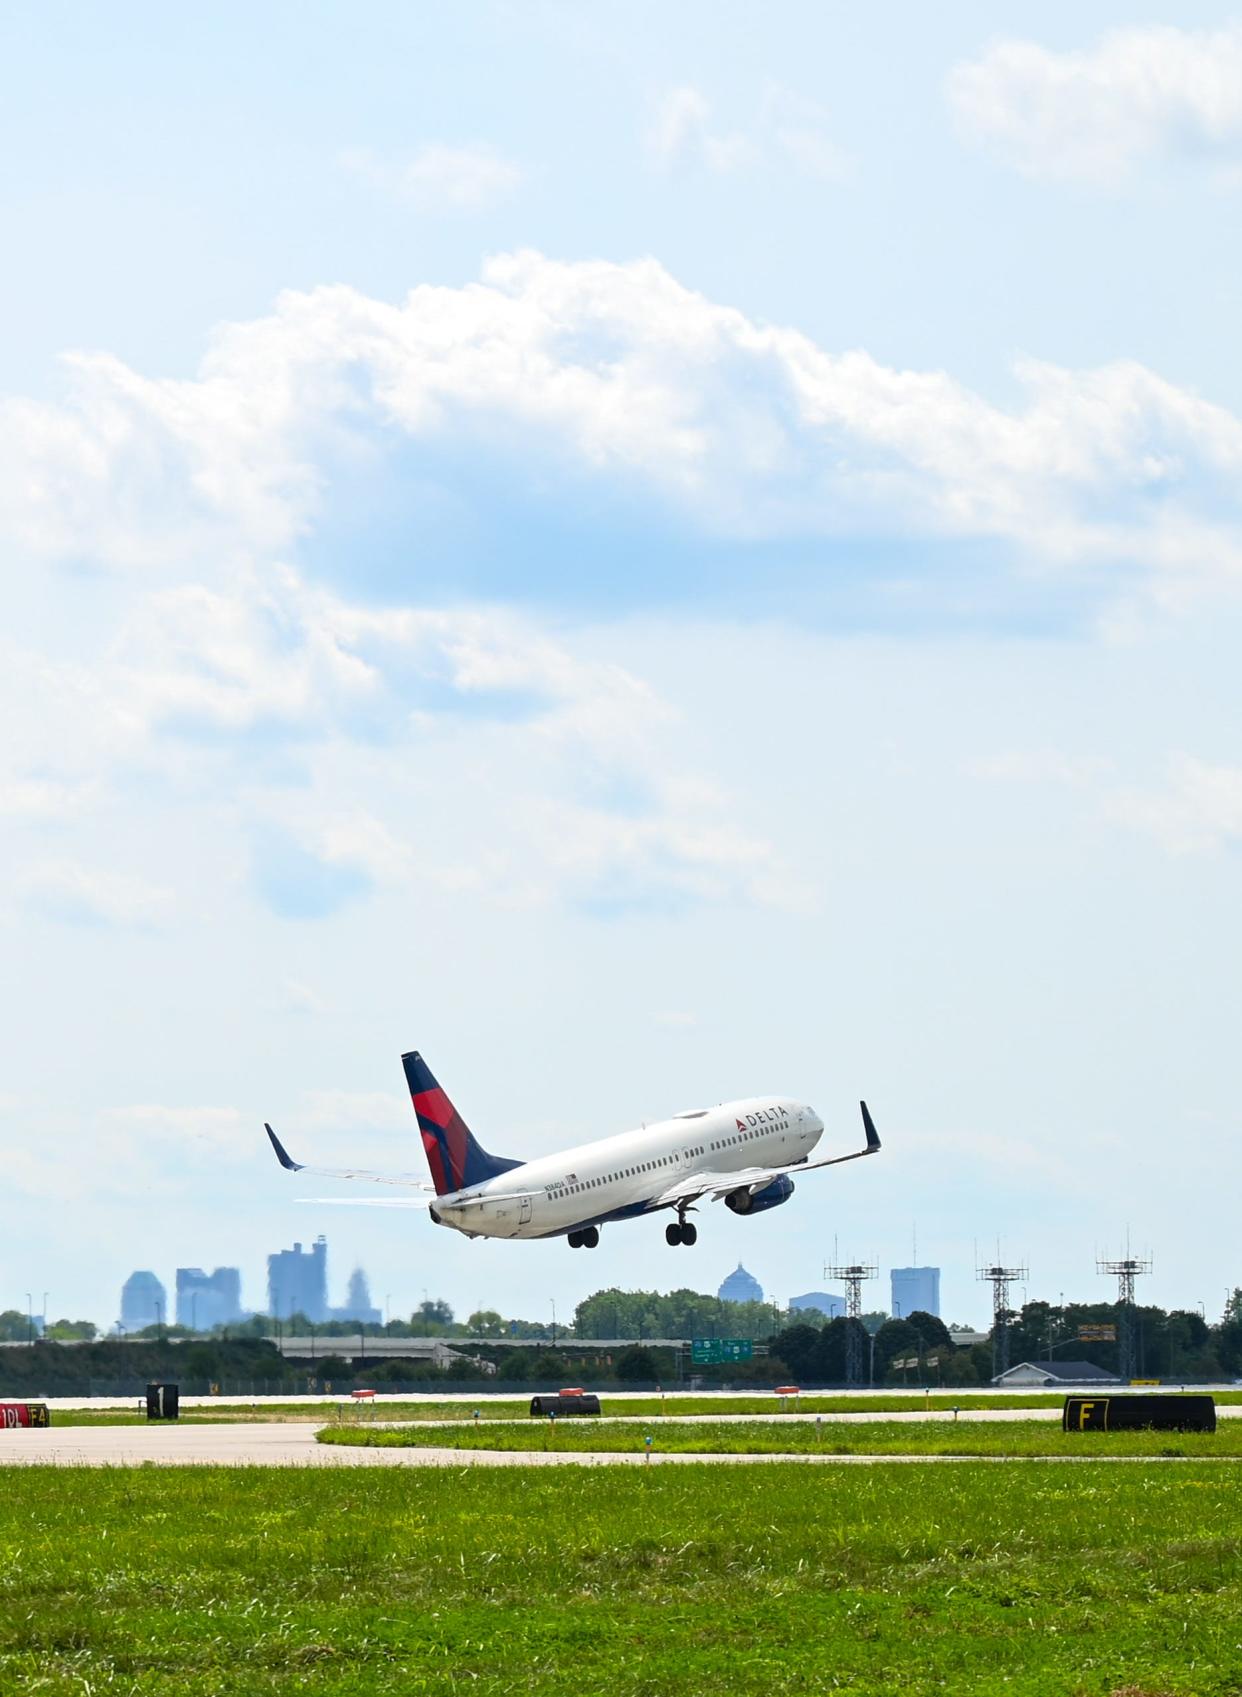 A Delta Air Lines jet takes off from John Glenn Columbus International Airport in this August 2022 file photo.